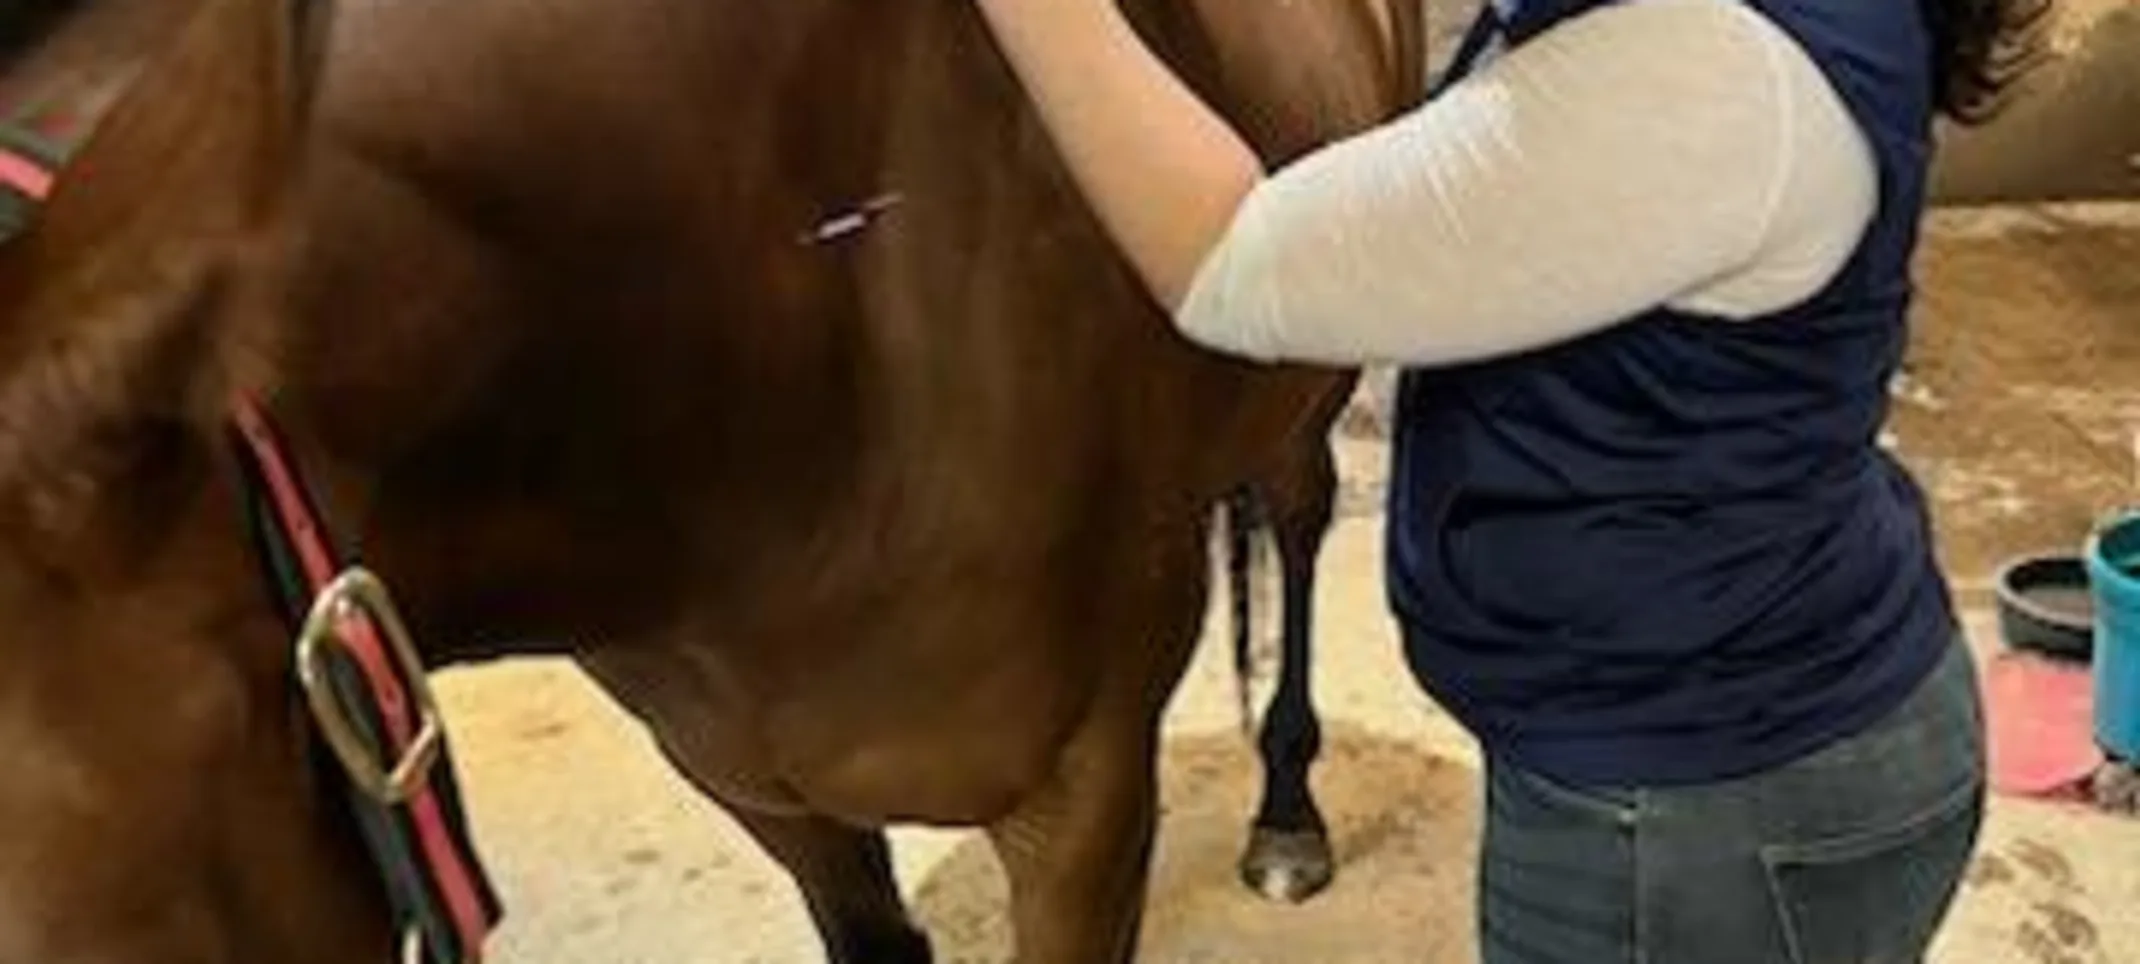 A horse receiving acupuncture